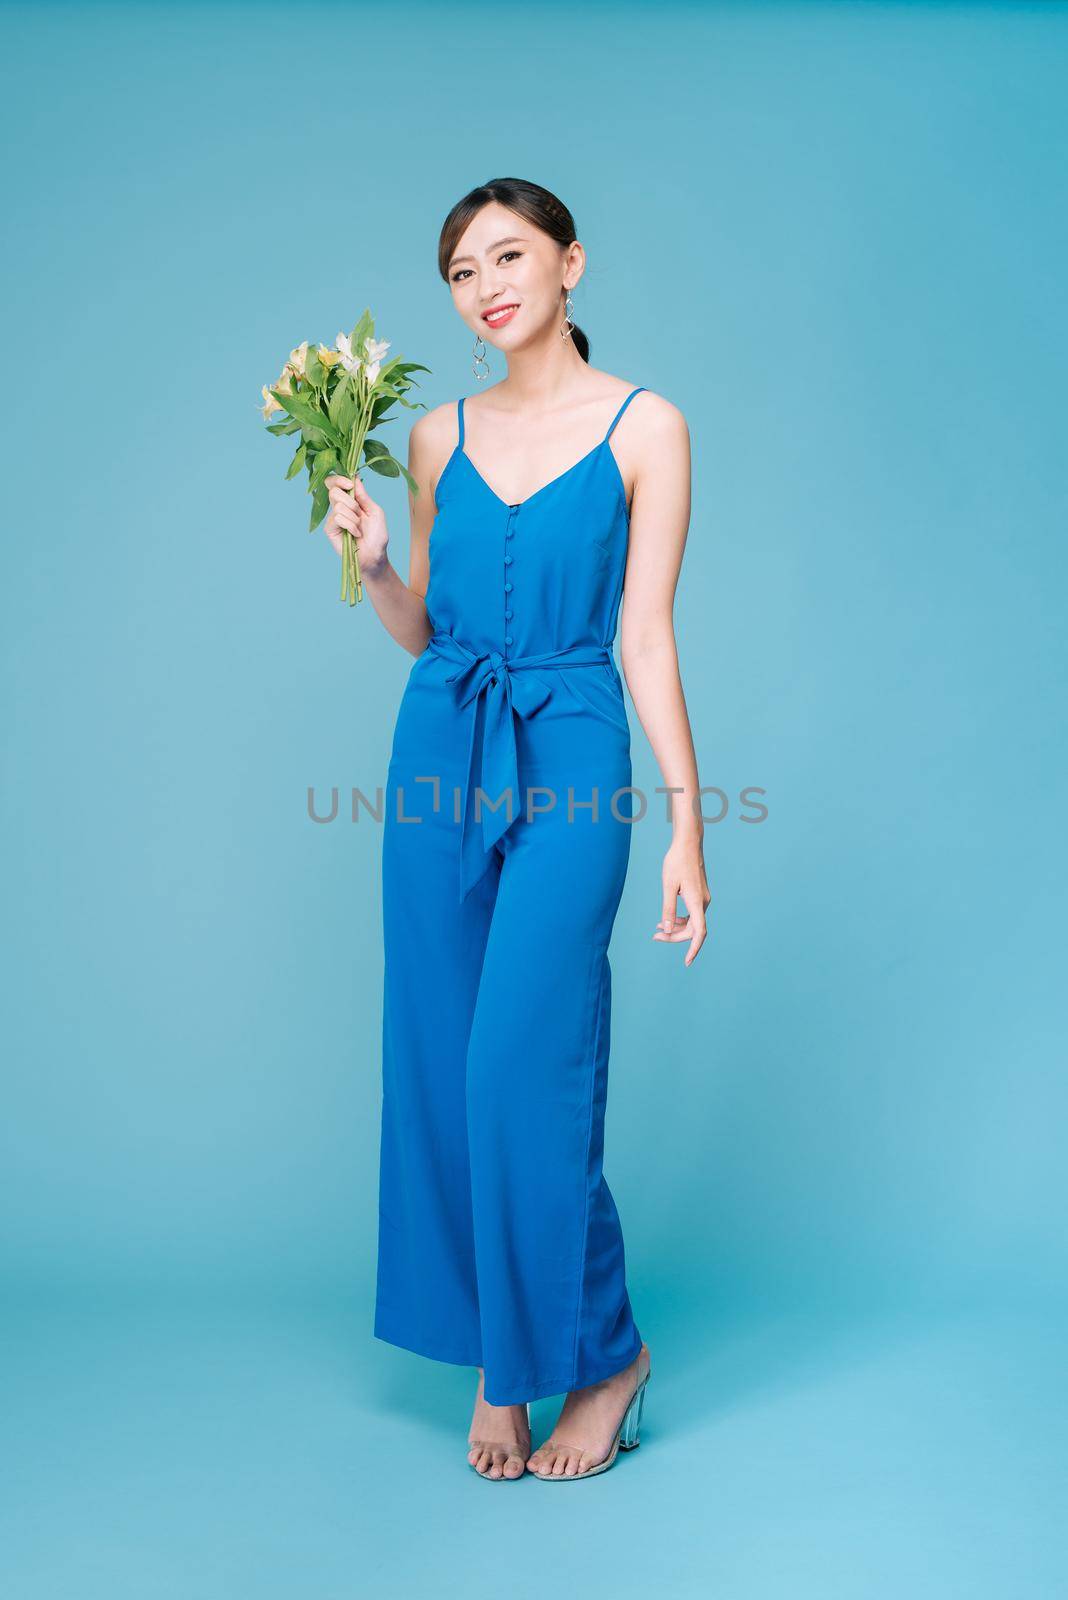 Beautiful girl in the blue dress with flowers in hands on a light background 